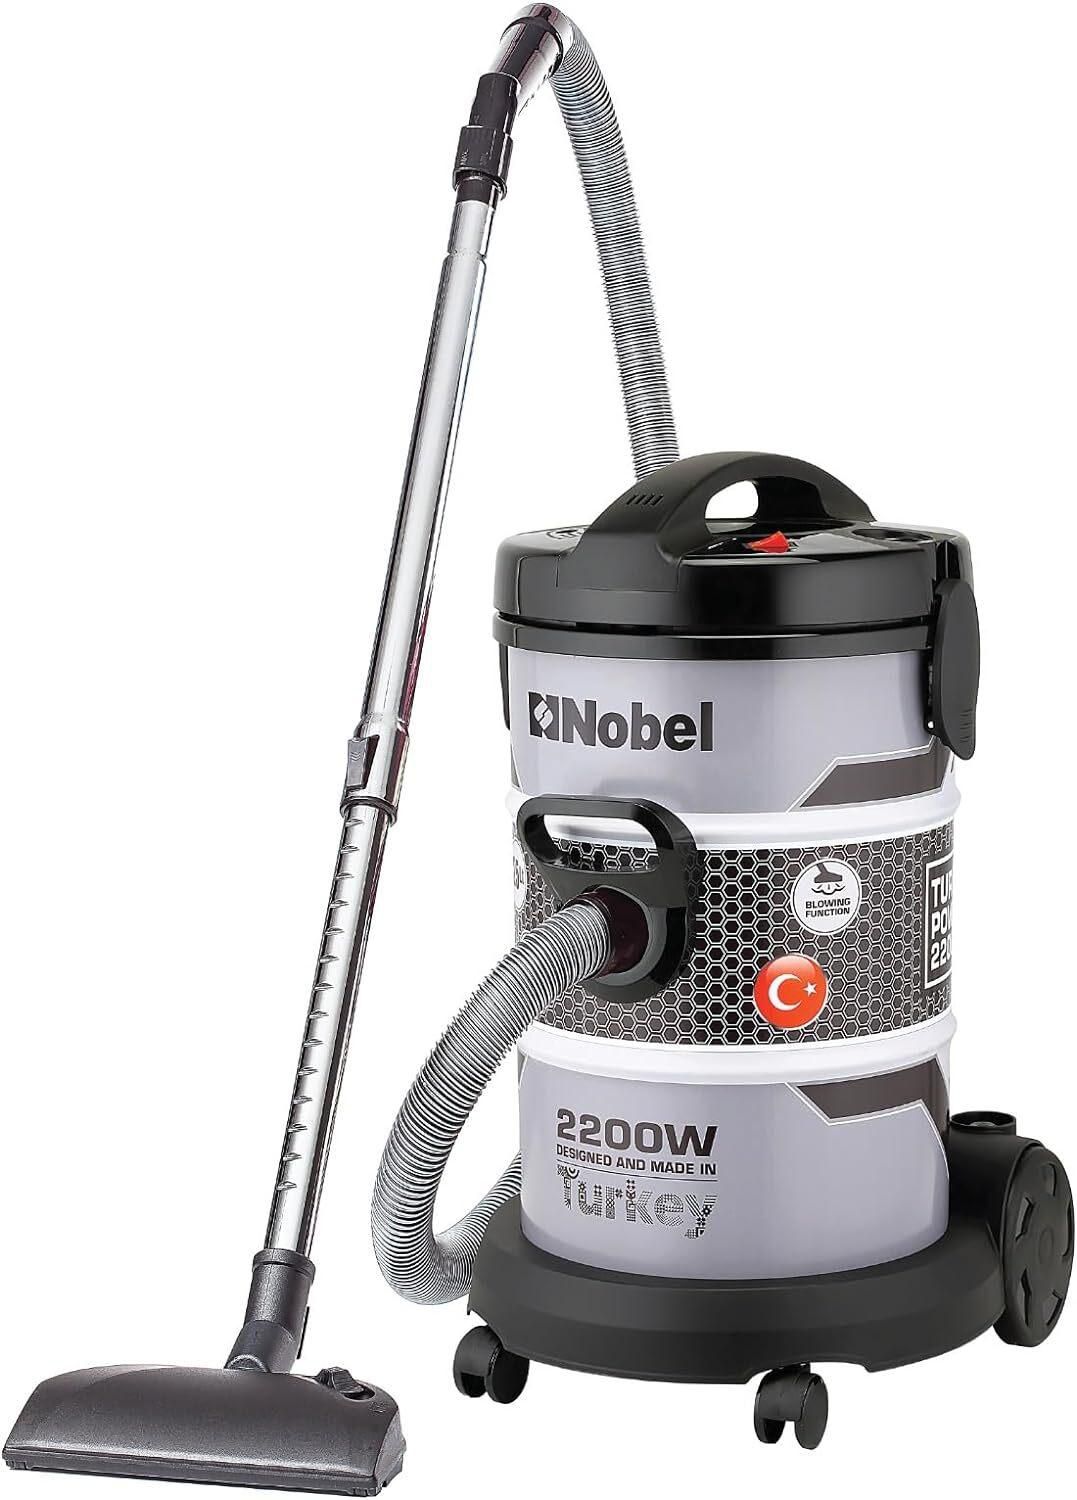 Nobel 25 Litres Drum Vacuum Cleaner Made In Turkey With Air Speed Control 360&deg; Hose Rotating Low Noise With Extra long Power Code NVC2600 Grey/Black 1 Year Warranty